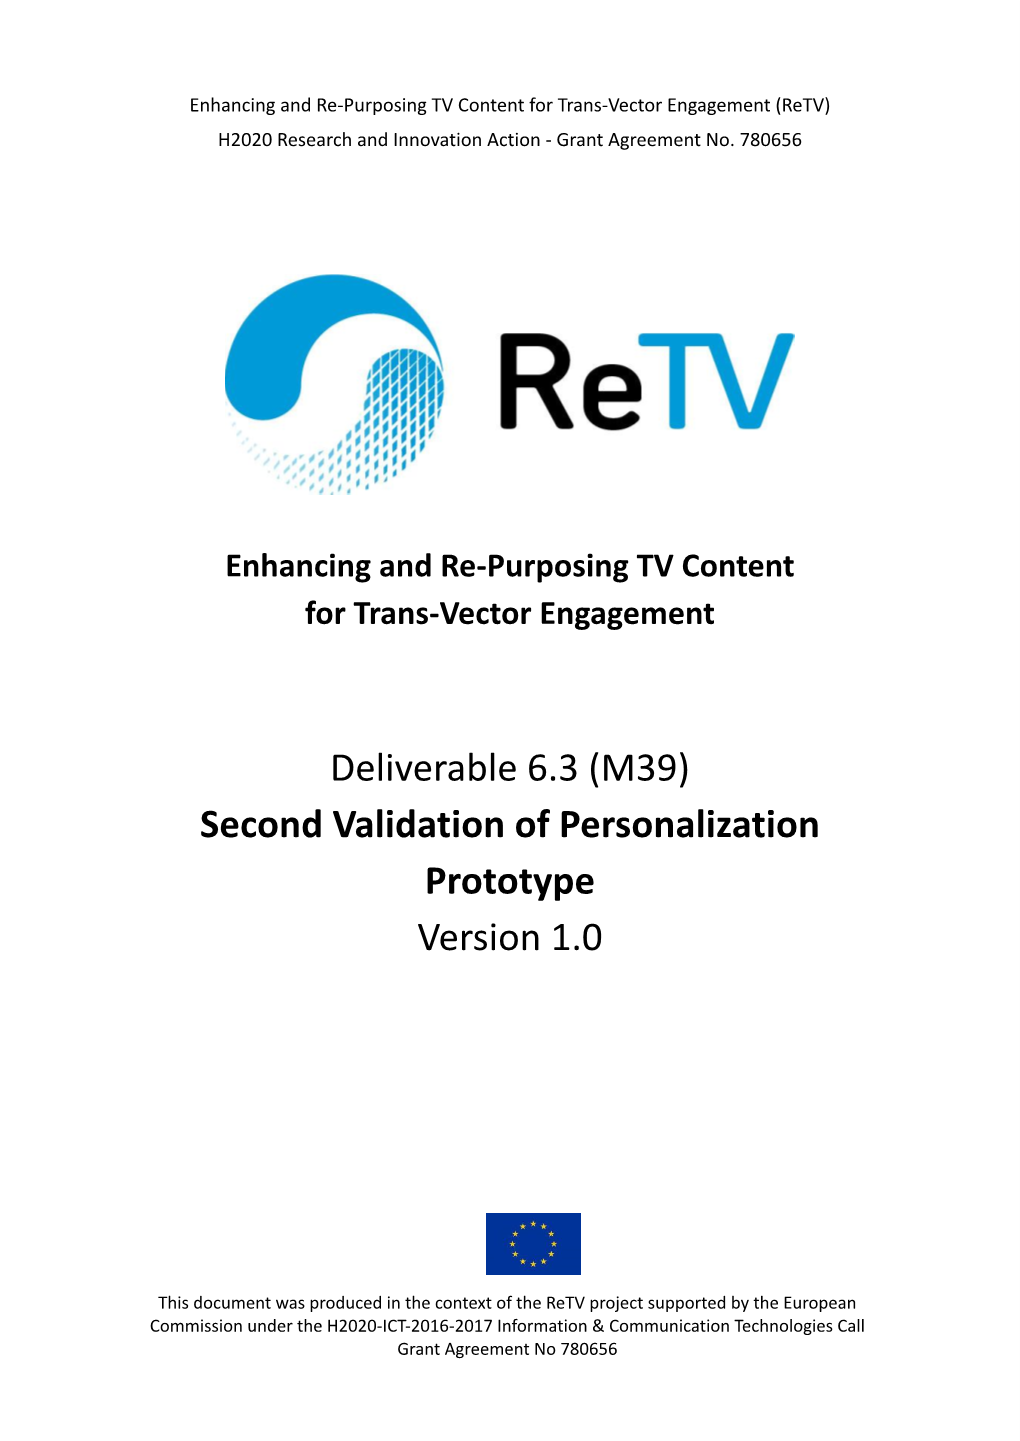 Second Validation of Personalization Prototype Version 1.0